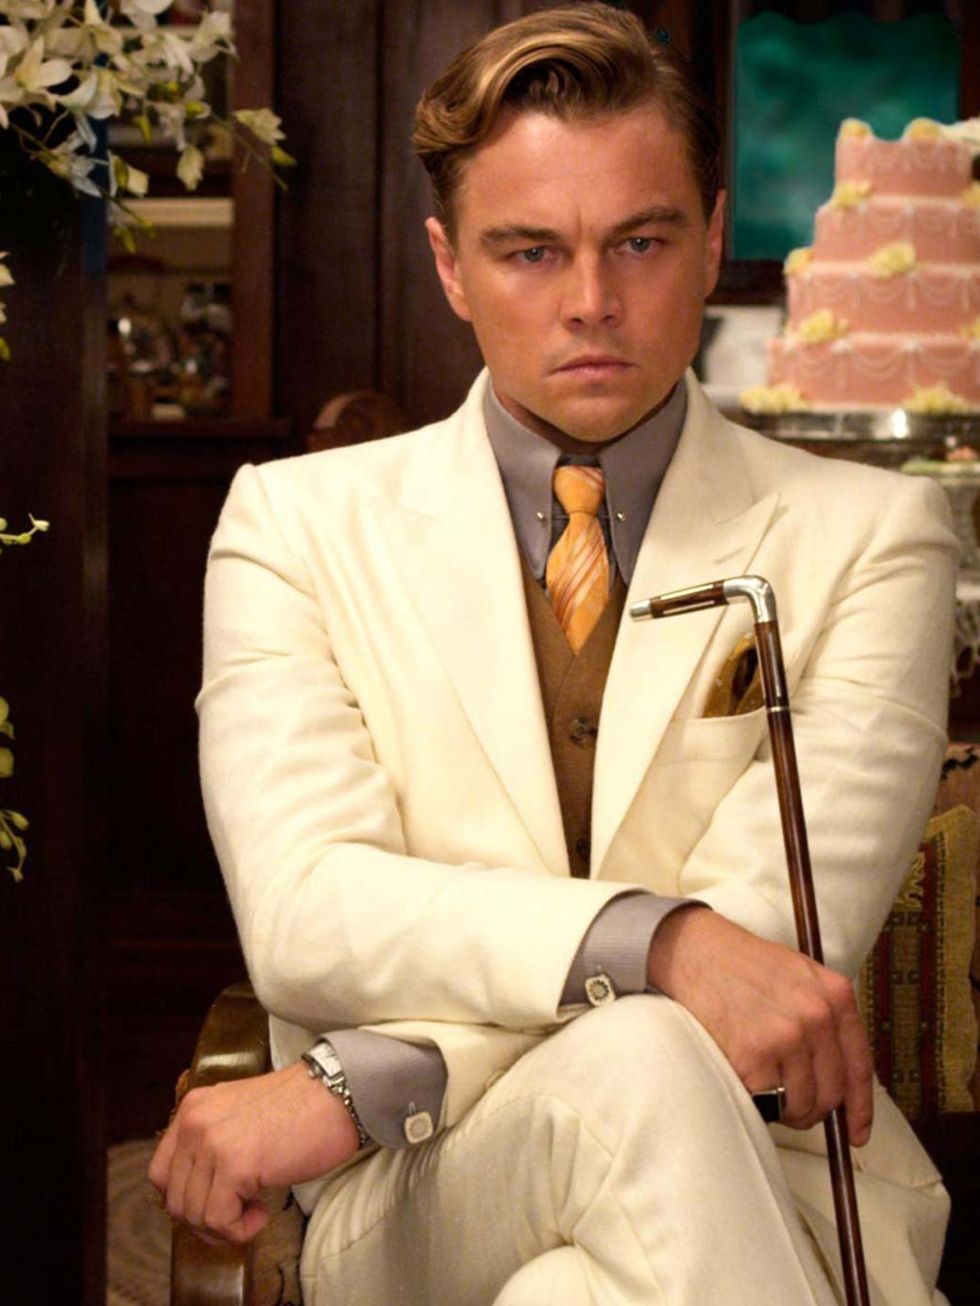 <p><strong>Jay Gatsby: ELLE Man of the Week</strong></p><p>We love a man who knows how to throw a really ostentatious party. Lavish us broads with enough bootleg liquor and jazz and well happily turn flapper for the night.</p><p>We also have a penchant f